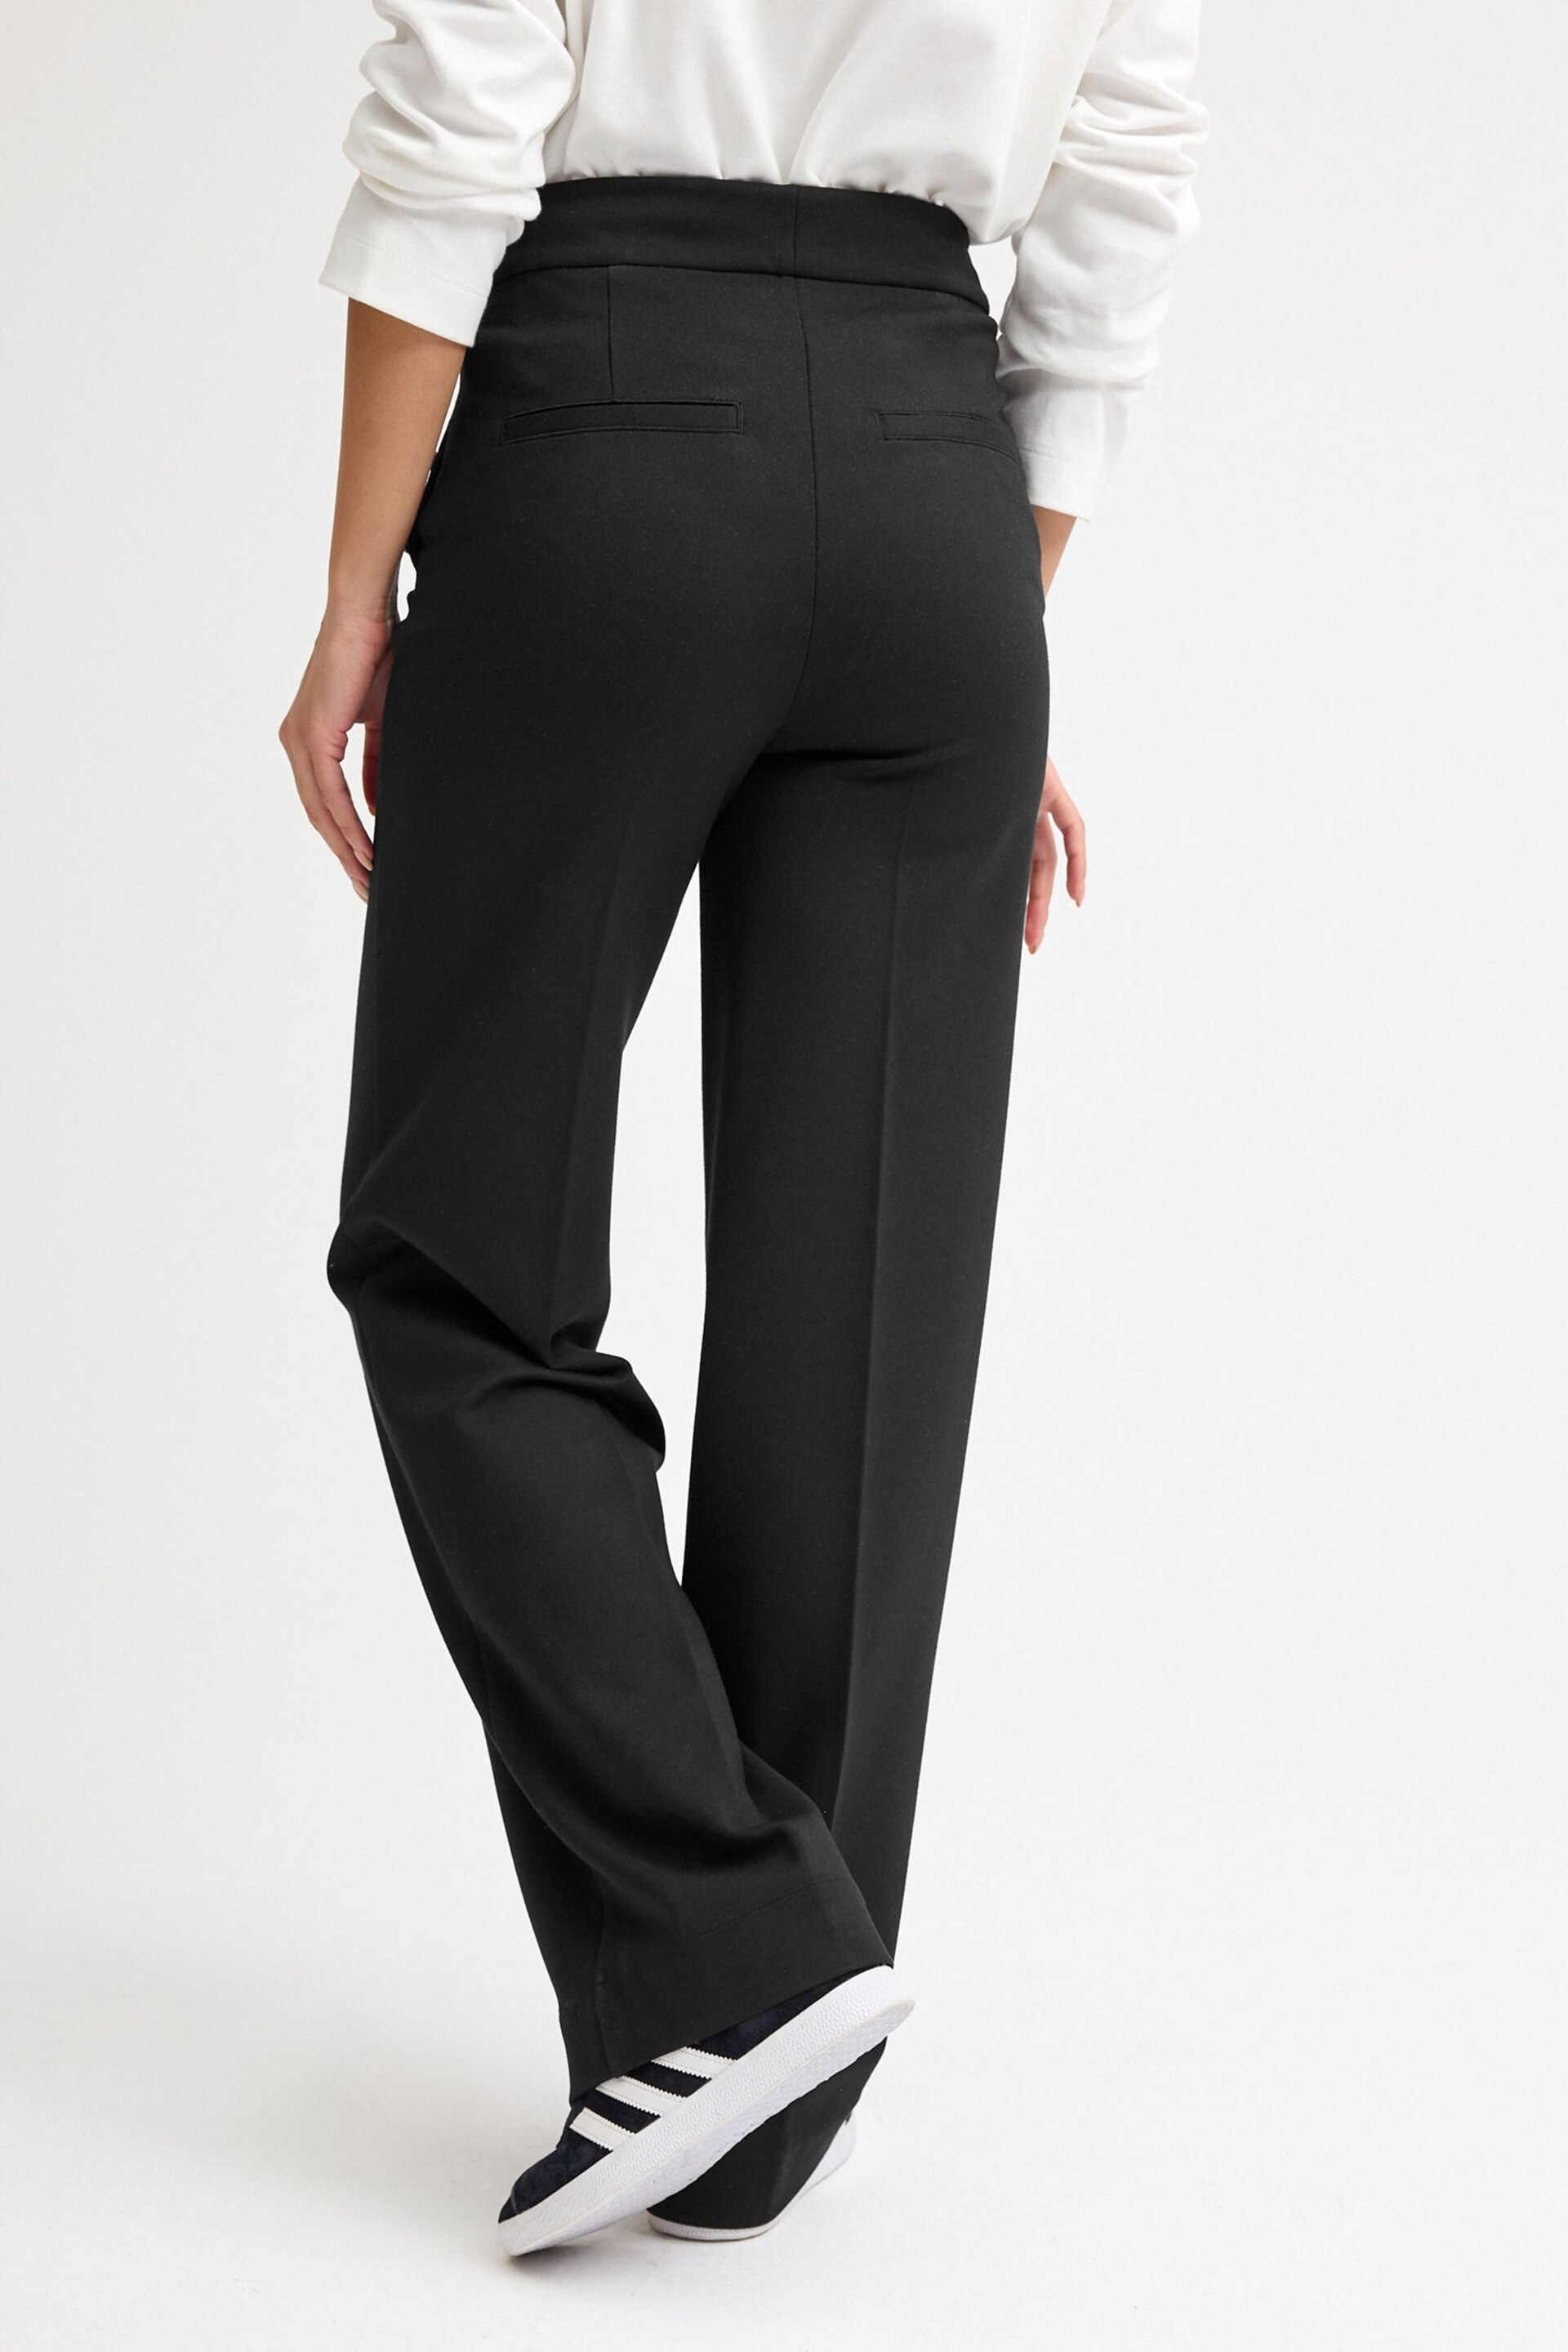 Black Ponte Button Wide Leg Trousers - Image 3 of 6